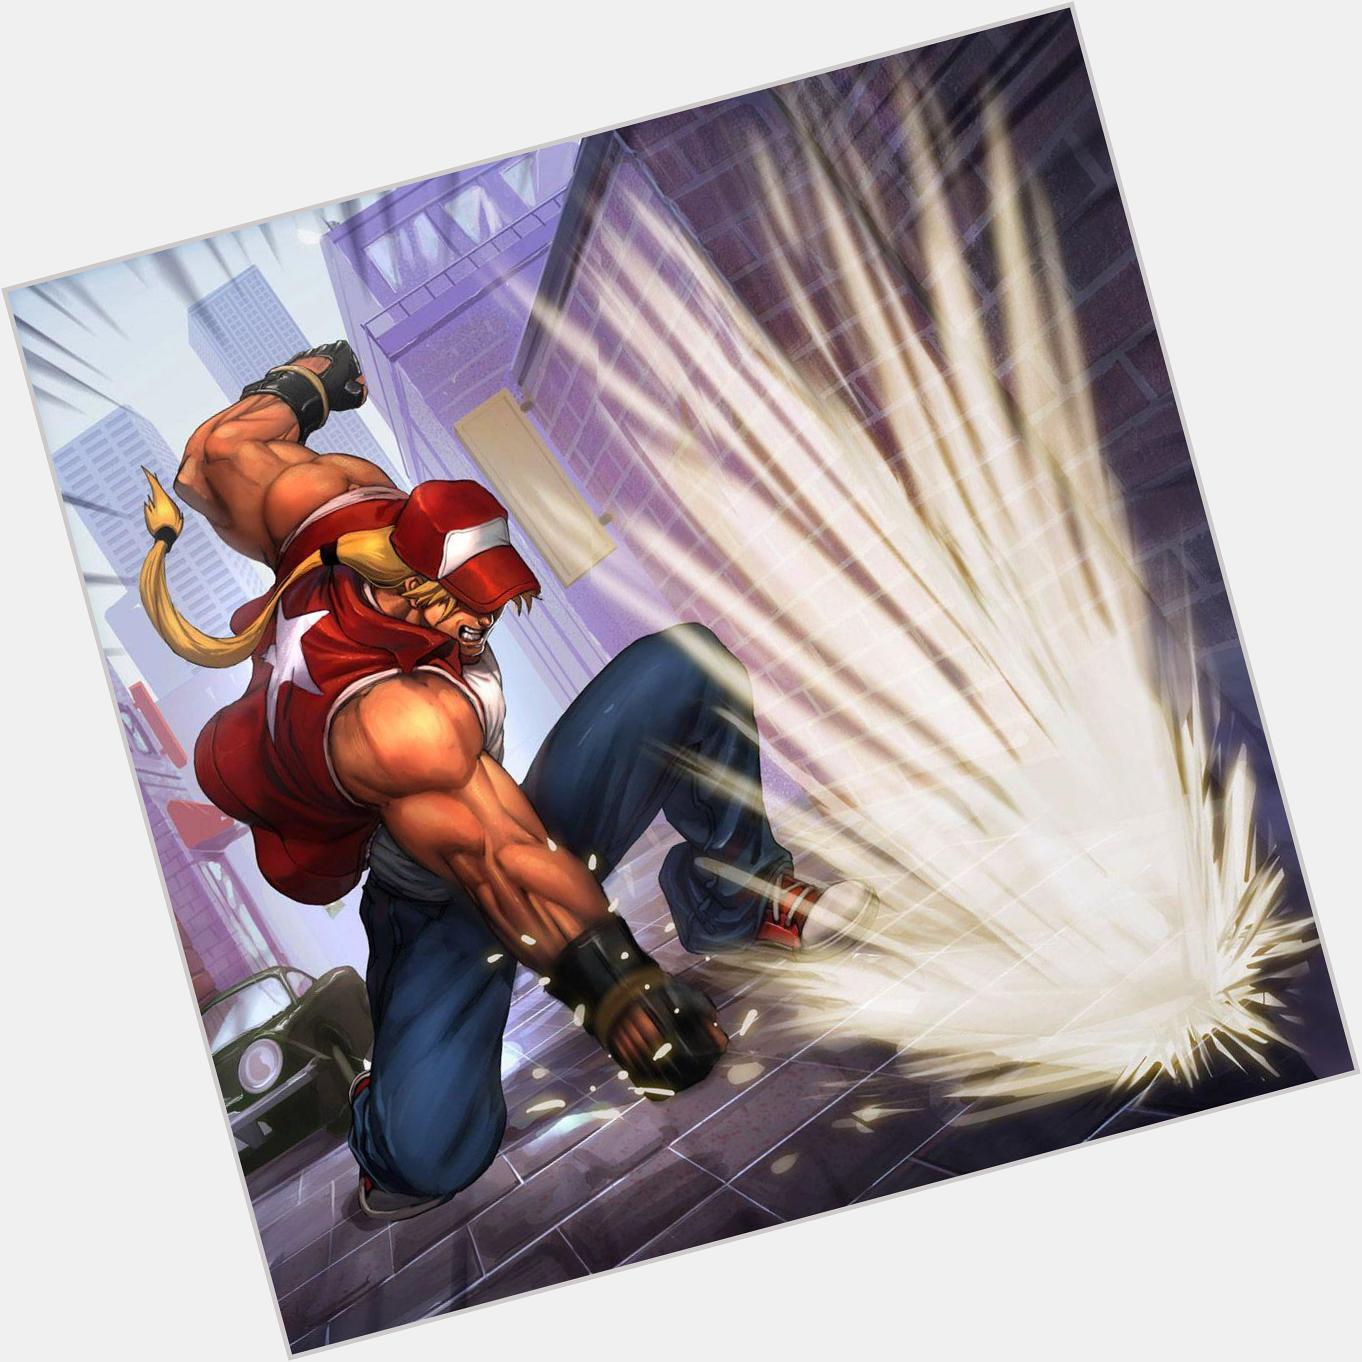 Happy Birthday to Wolf of the South Town Terry Bogard.

Really excited for his trailer for 